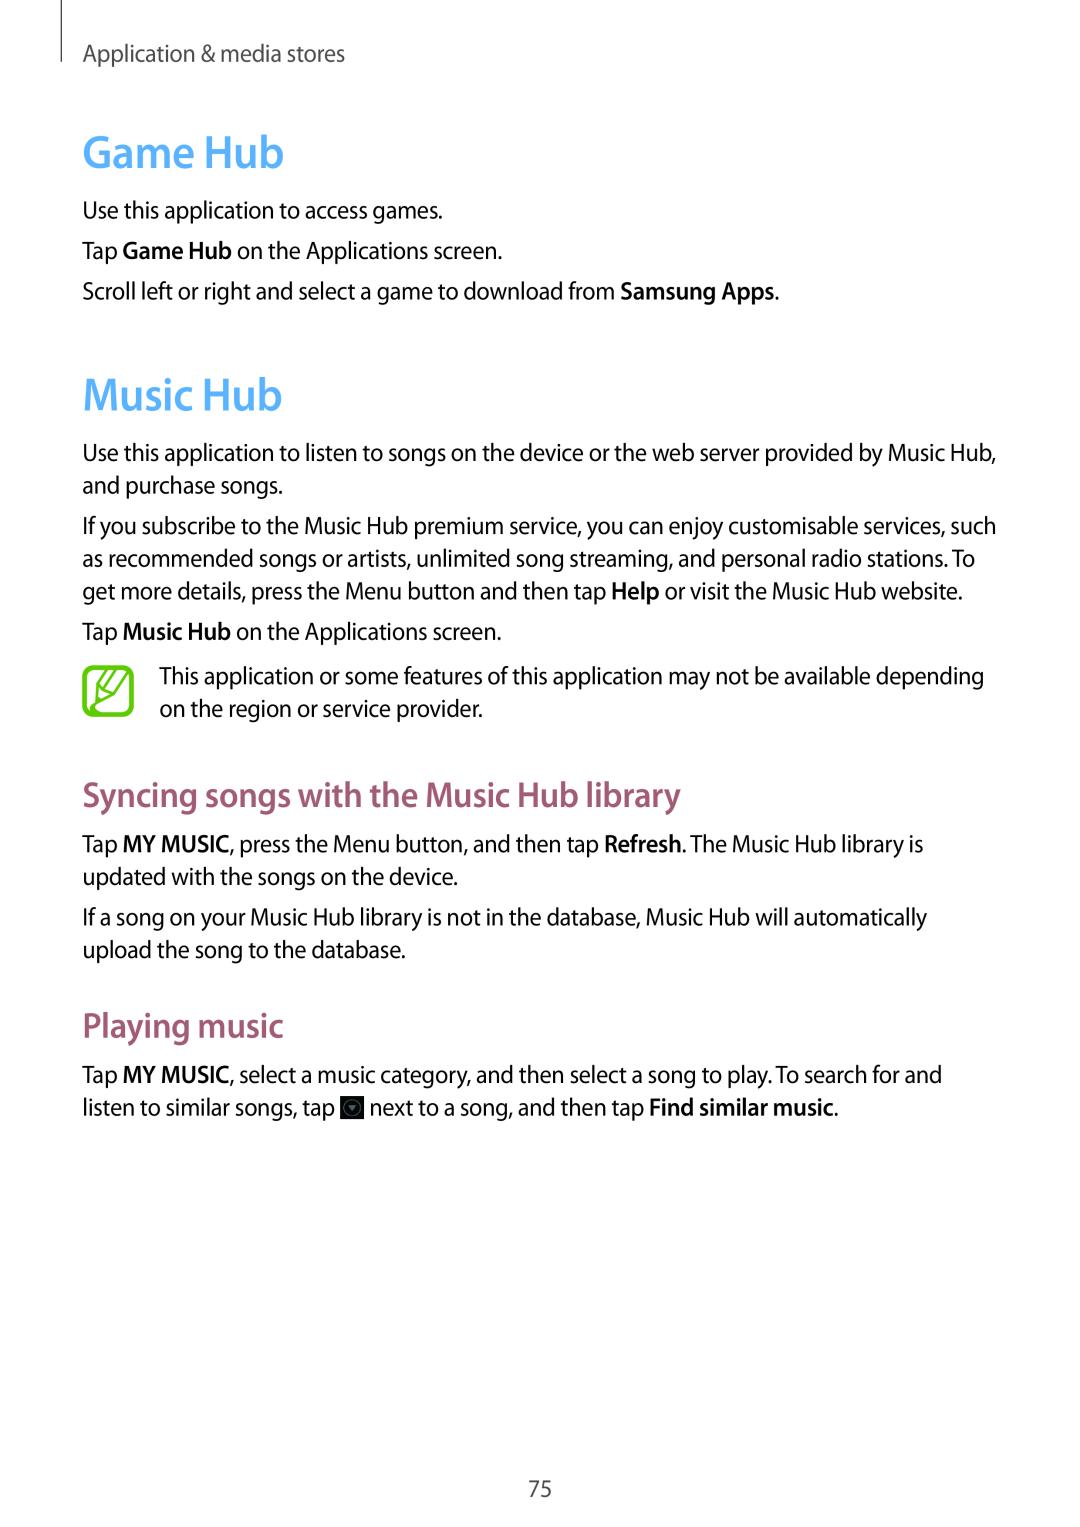 Samsung GT-S7710TAAPLS Game Hub, Syncing songs with the Music Hub library, Playing music, Application & media stores 